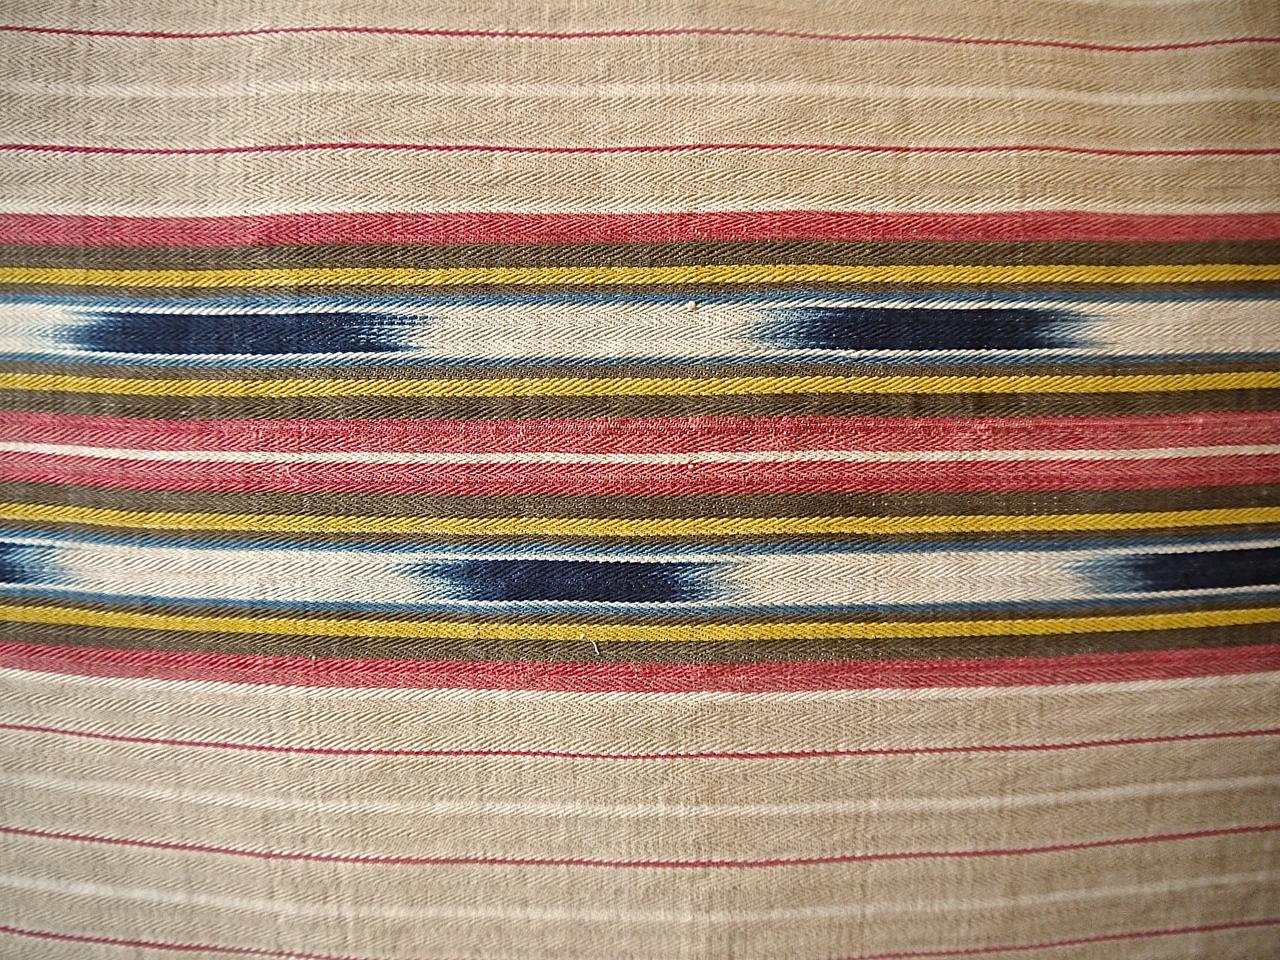 French late 19th century unusual striped ticking linen cushion with an unusual indigo ikat detail in the stripe. Stripes of lightly faded beige, red and yellow with indigo ikat floating in between. With natural indigo dyed vintage French cotton